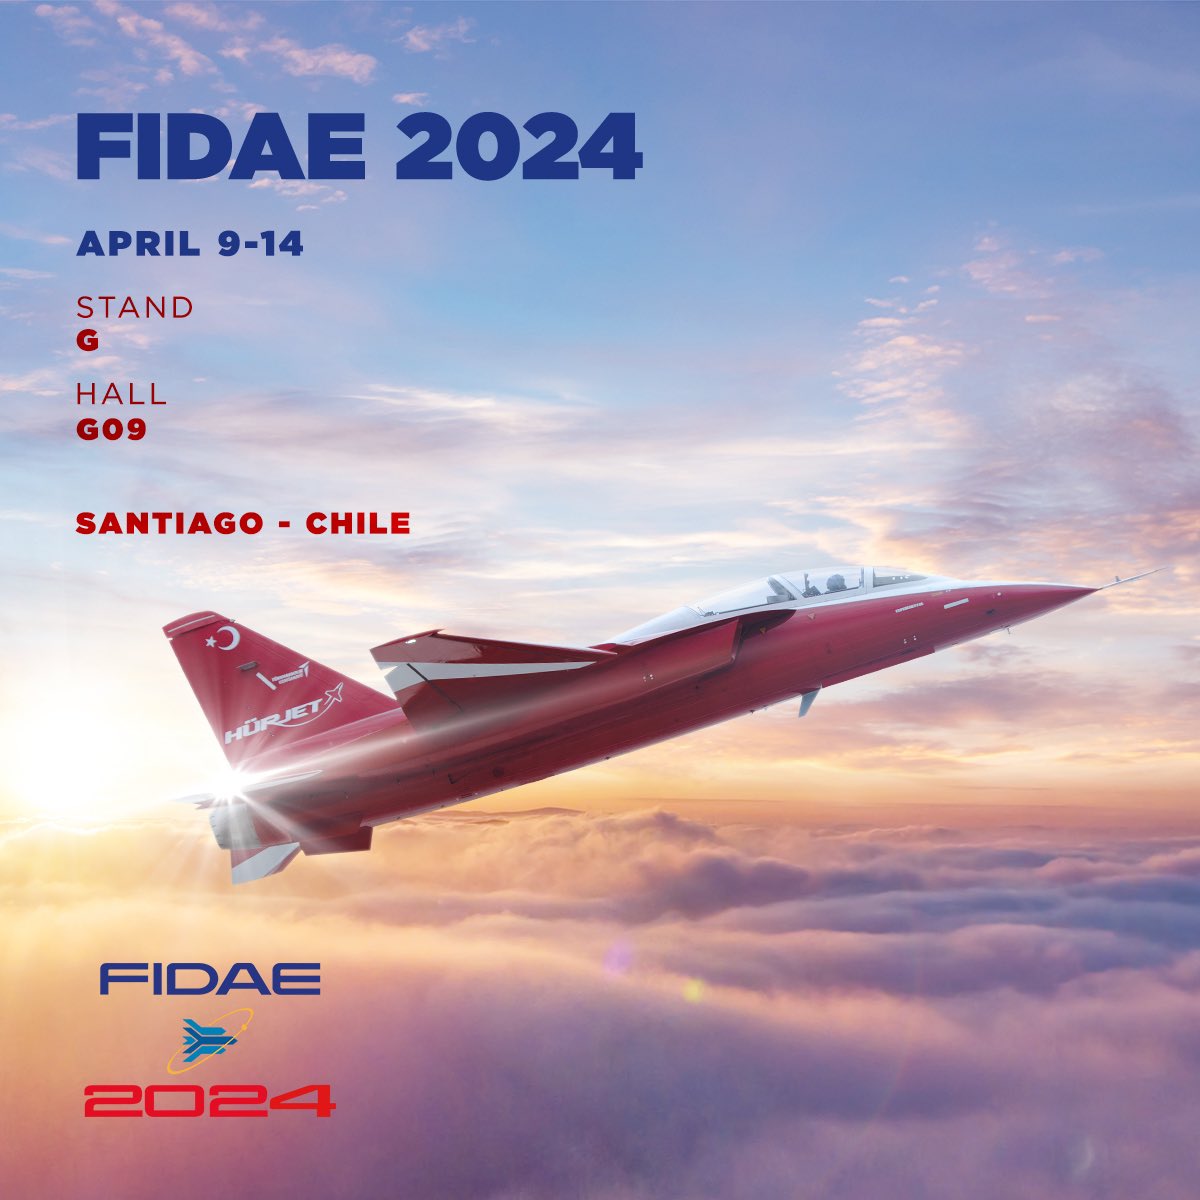 We are ready to exhibit our technologies at #FIDAE2024, The International Air and Space Fair held in Chile. You can visit us and meet the heroes of the sky at our stand!✈️ 🗓️ April 9-14 🚩 Stand G, Hall G09